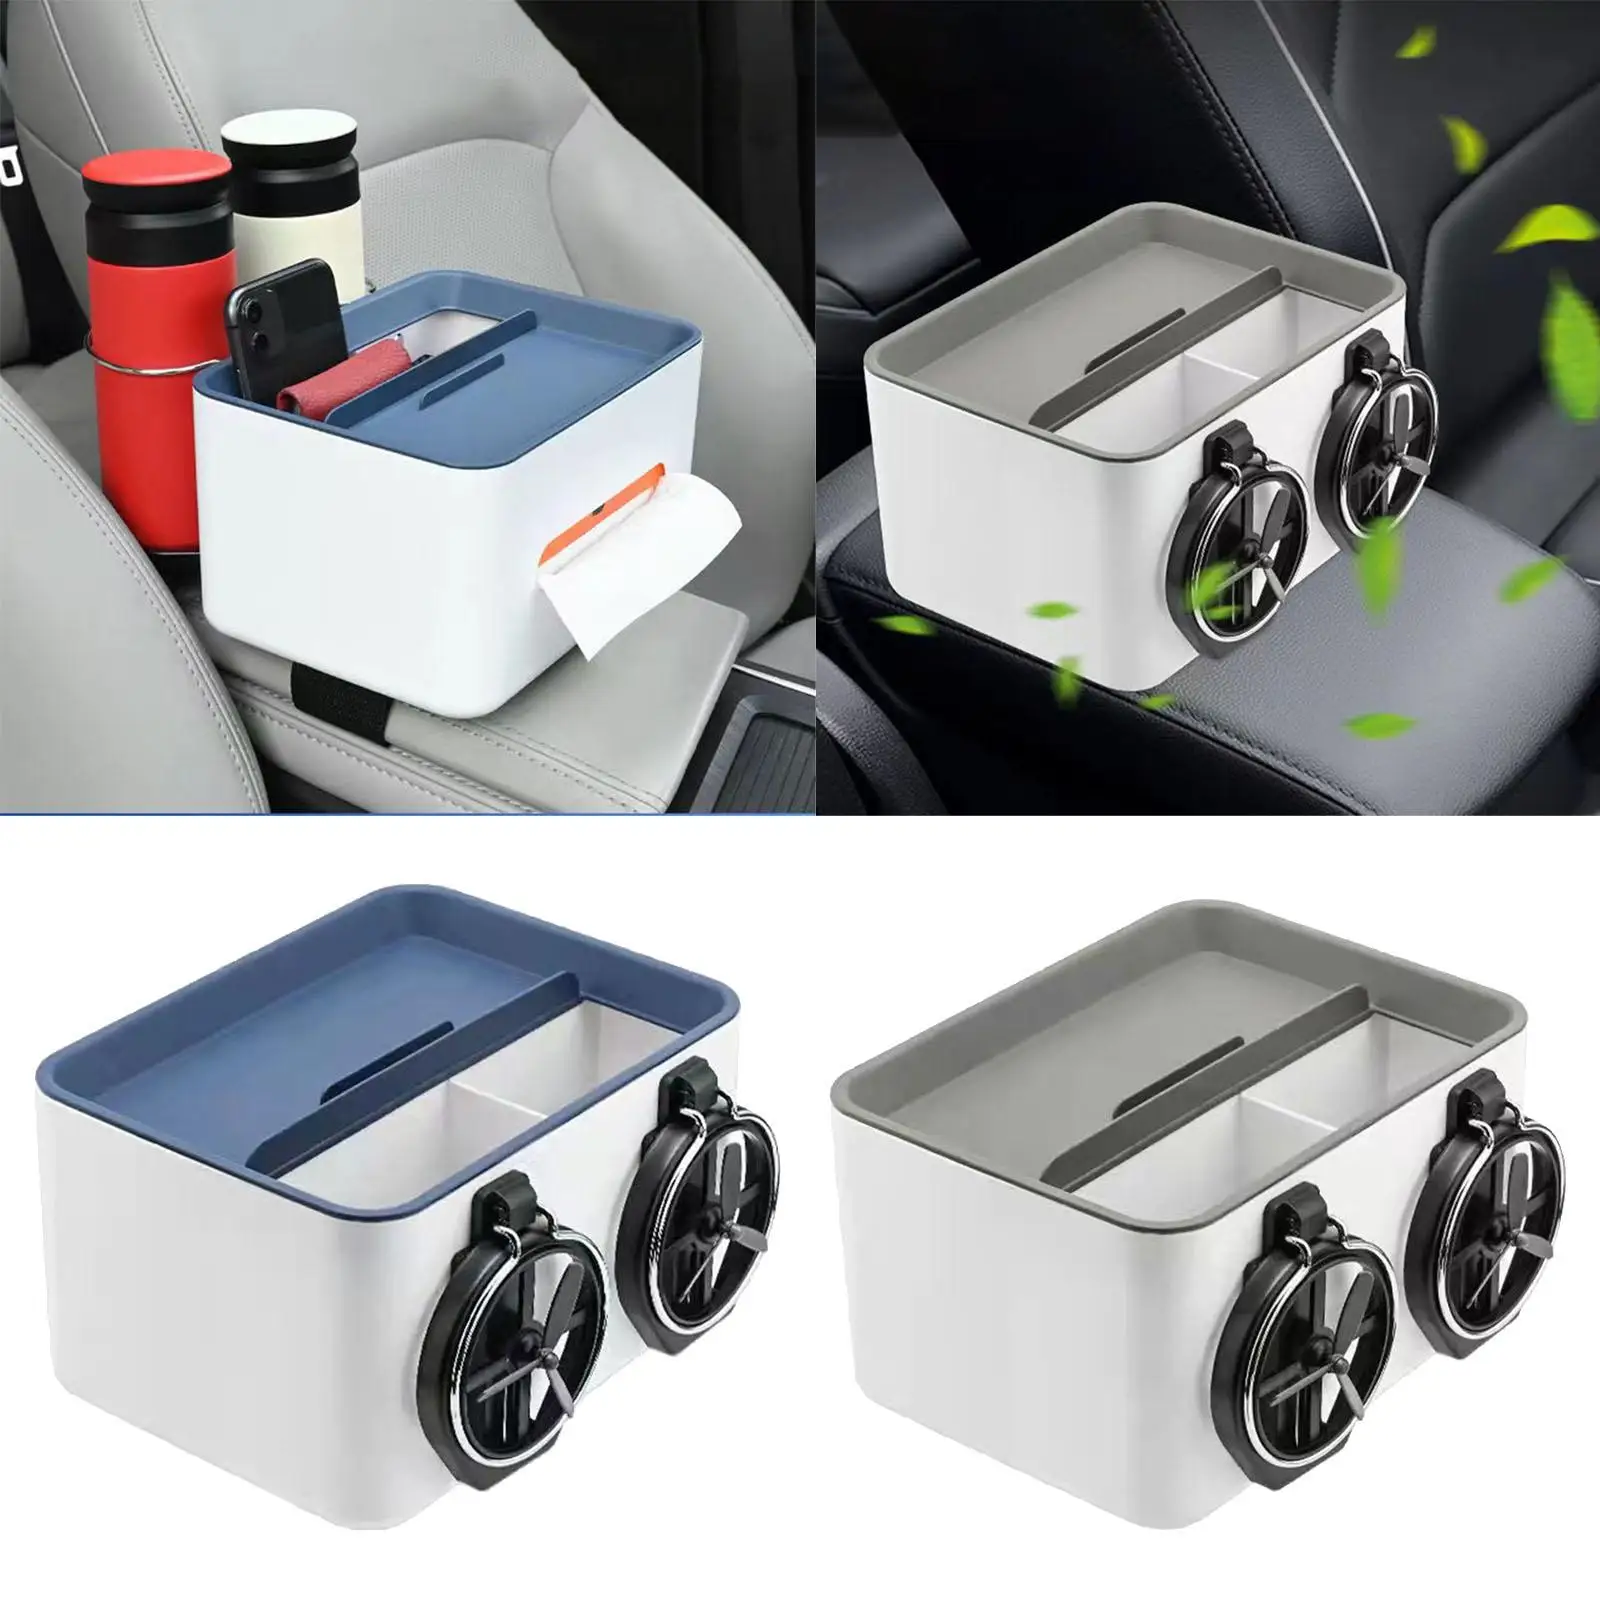 Water Cup Holder Universal Car Console Side Foldable Car Armrest Storage Box Seat Organizer for Cellphones Water Cup Tissue